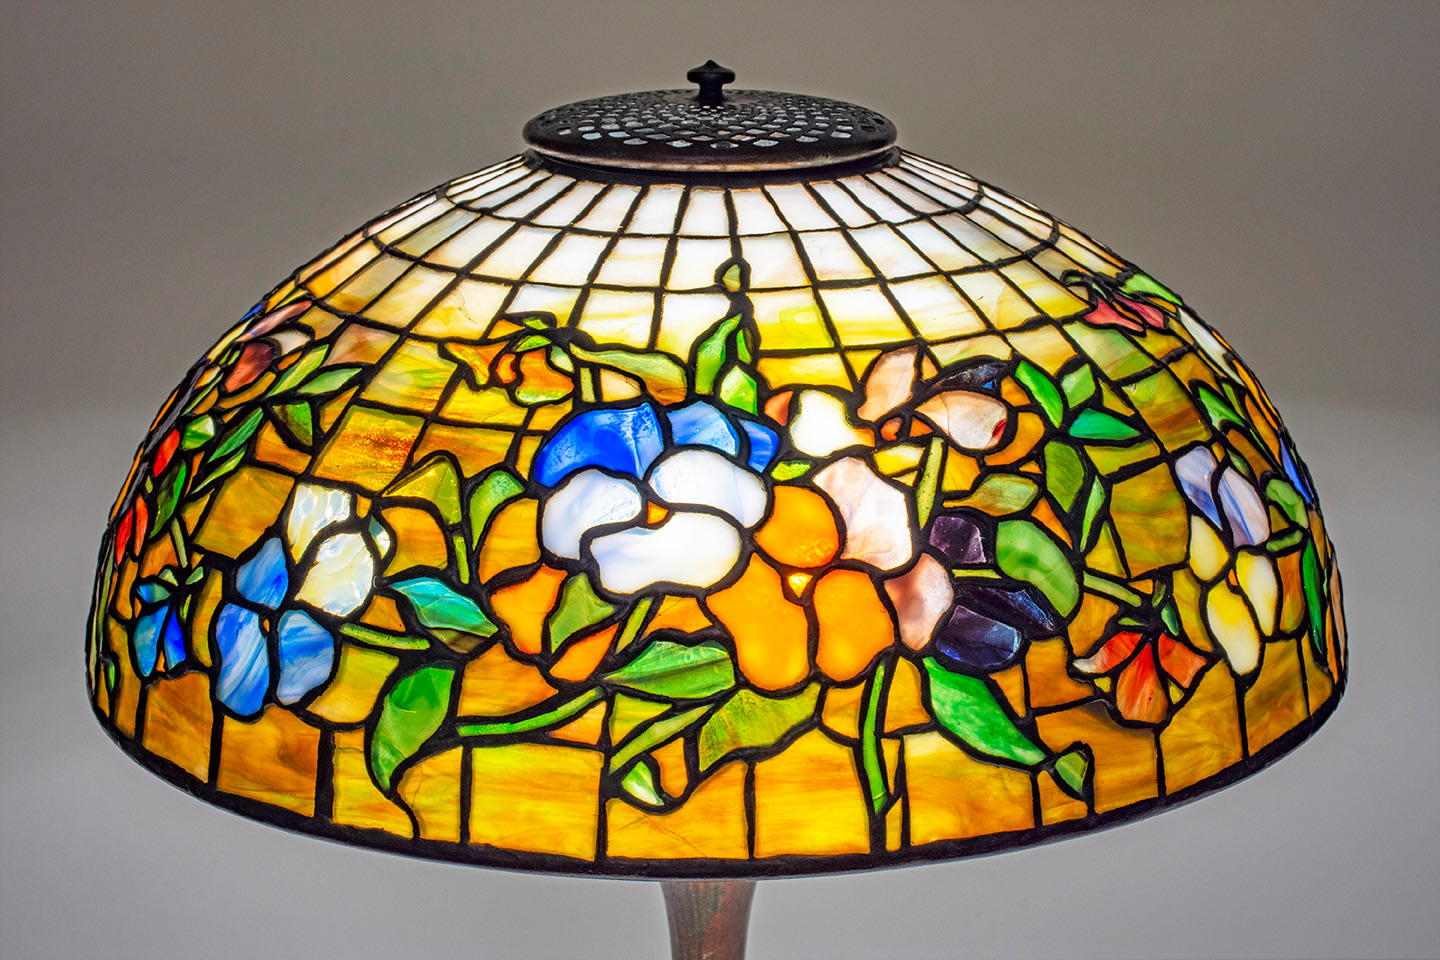 Pansy Table Lamp